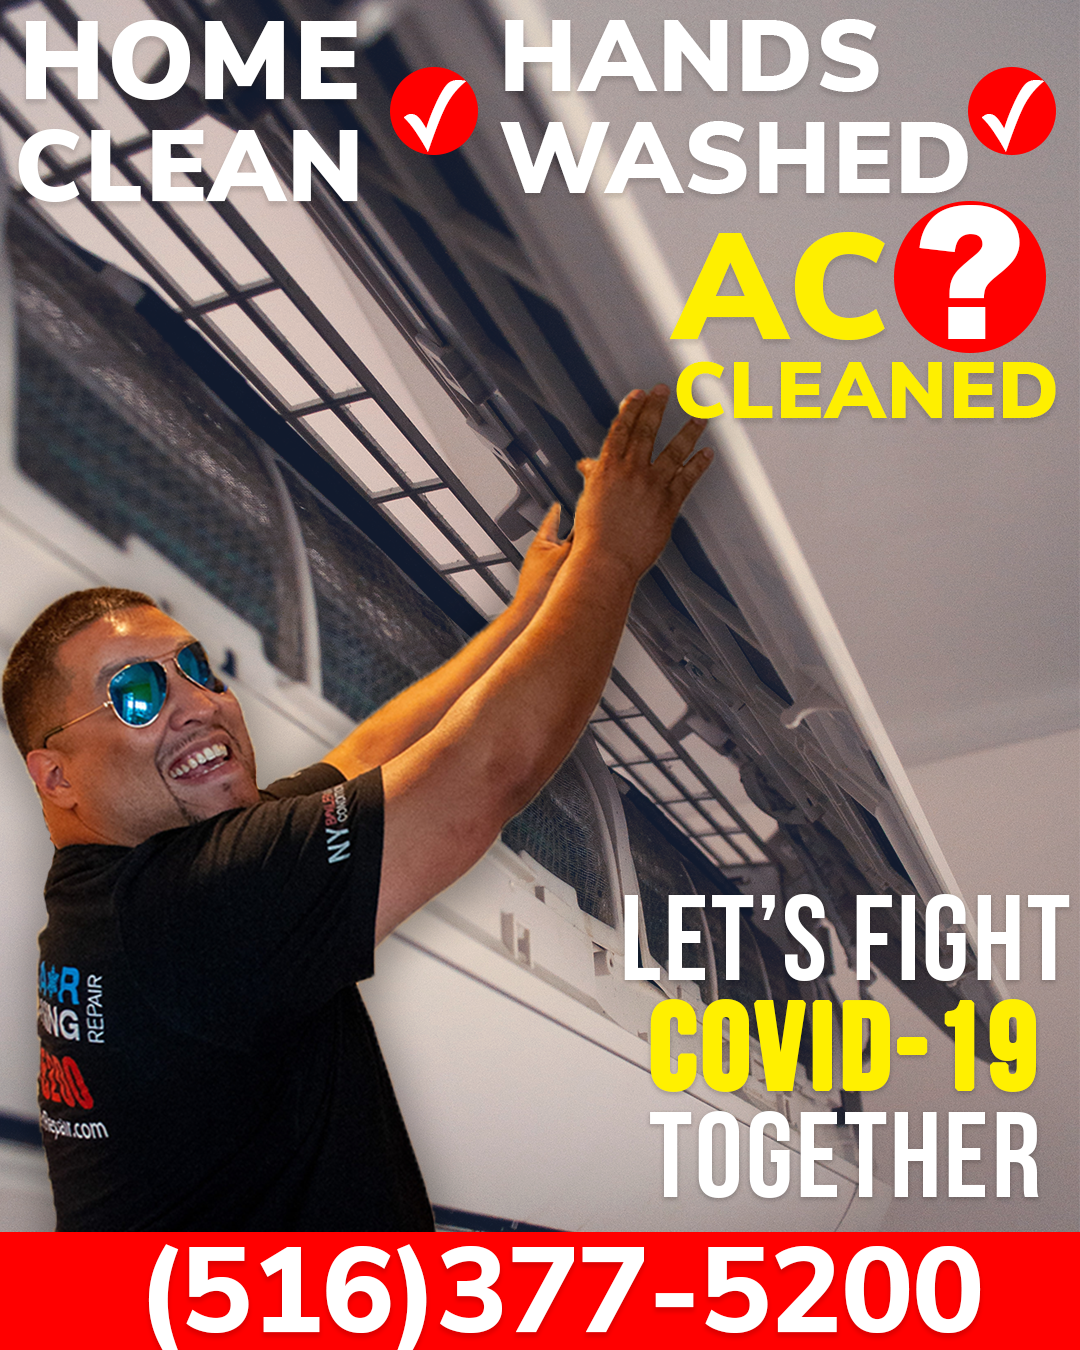 Make sure your home is clean, your hands washed and how about your AC?? Let's fight Covid-19 together